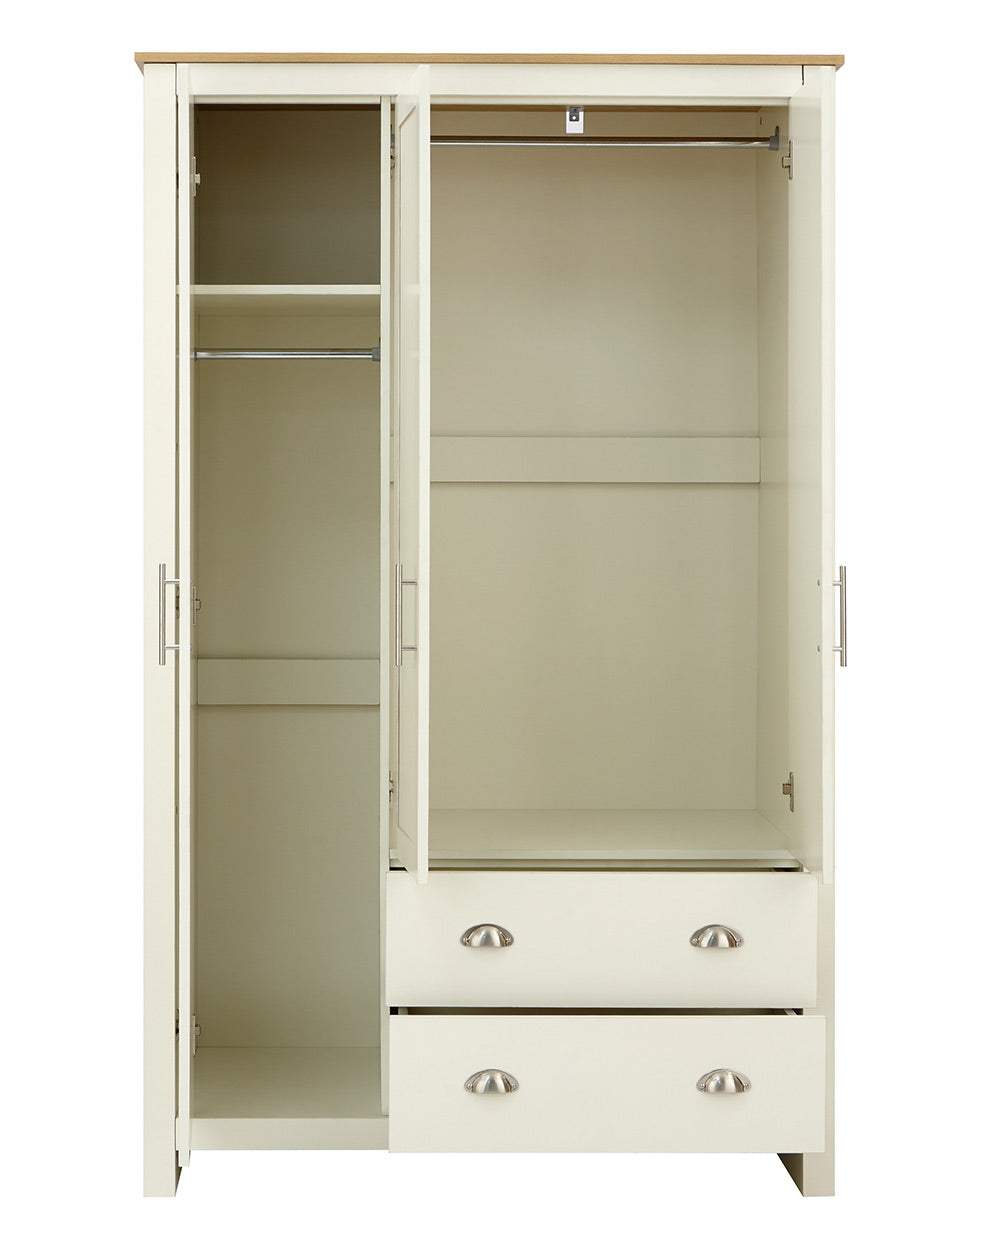 Lancaster 3 door 2 drawer wardrobe shaker style doors on a white cut out background front facing doors open